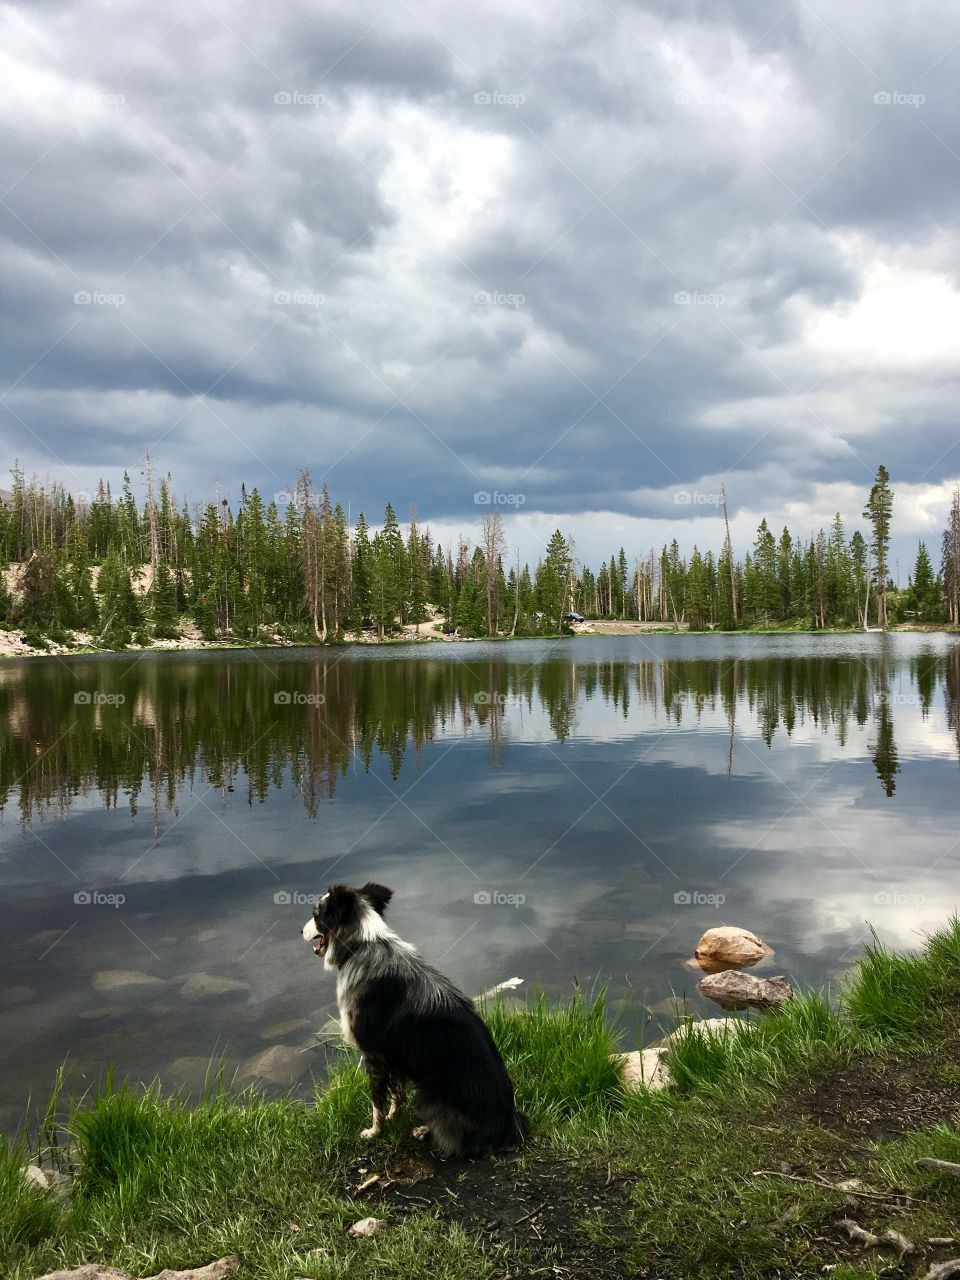 Best dog ever… Best camper ever… Best fishermen ever! She is one of the family. Sis is Australian Shepherd mix. She is smarter than most dogs. And pretend that she is just one of the kids. She loves sitting by the lake watching the fish.